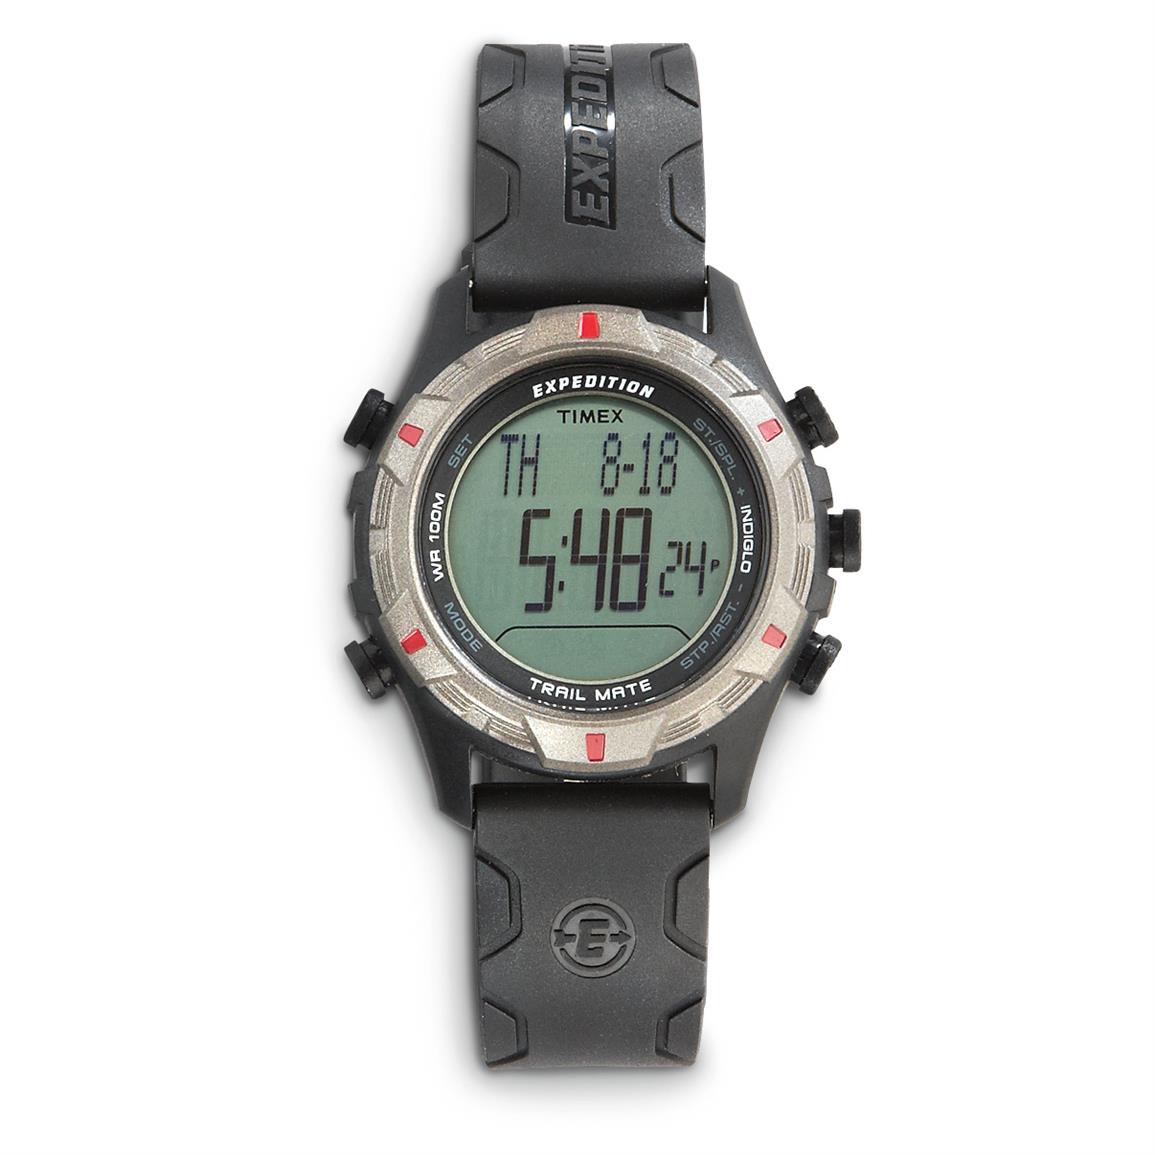 Timex Expedition Digital Trail Watch 640216, Watches at Sportsman's Guide